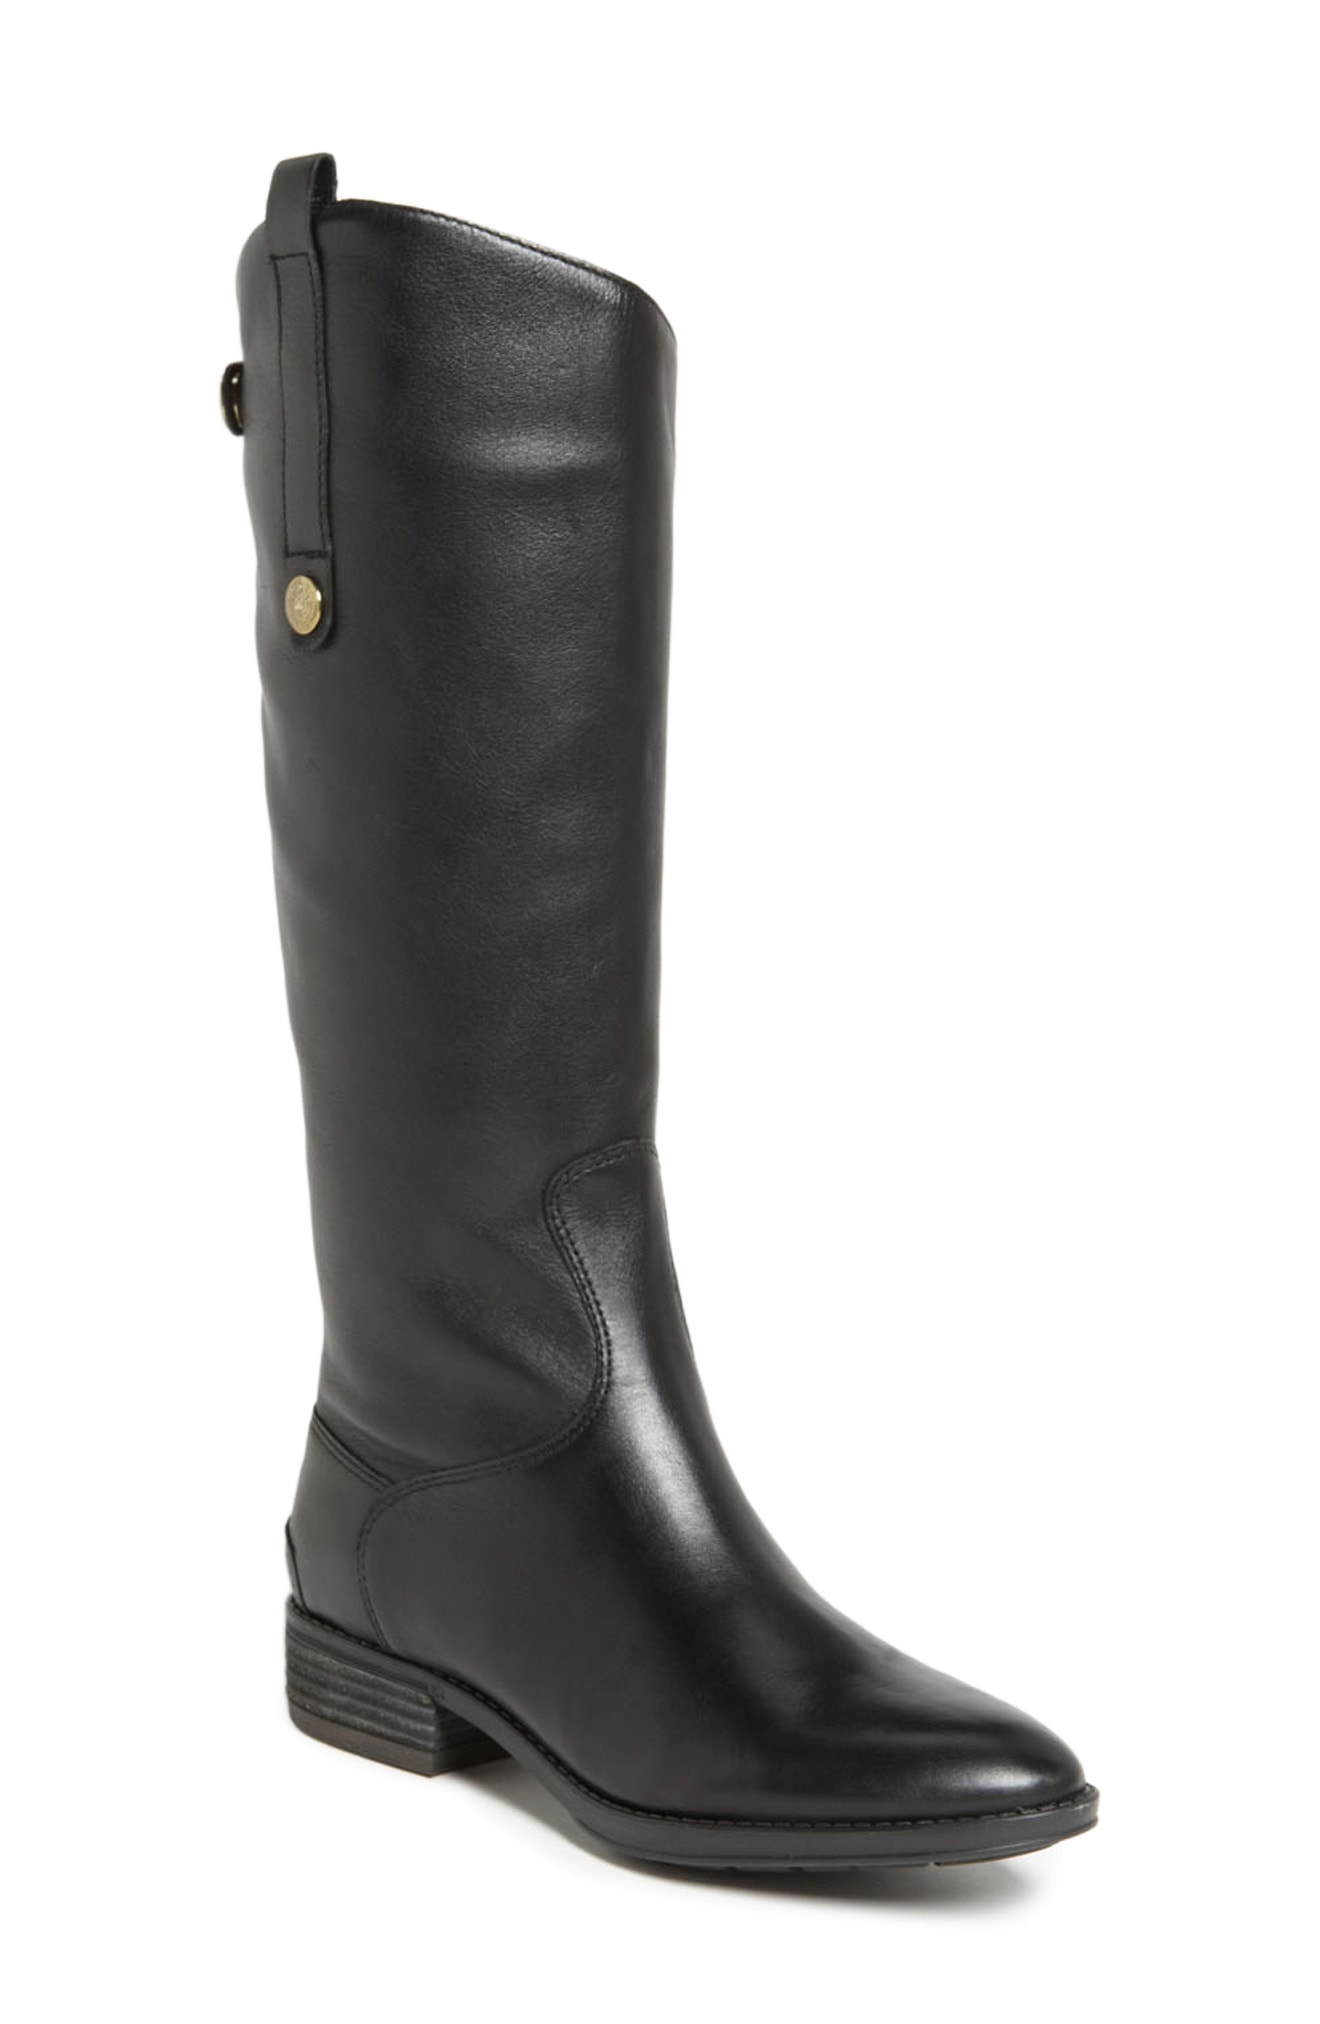 leather boots | Nordstrom